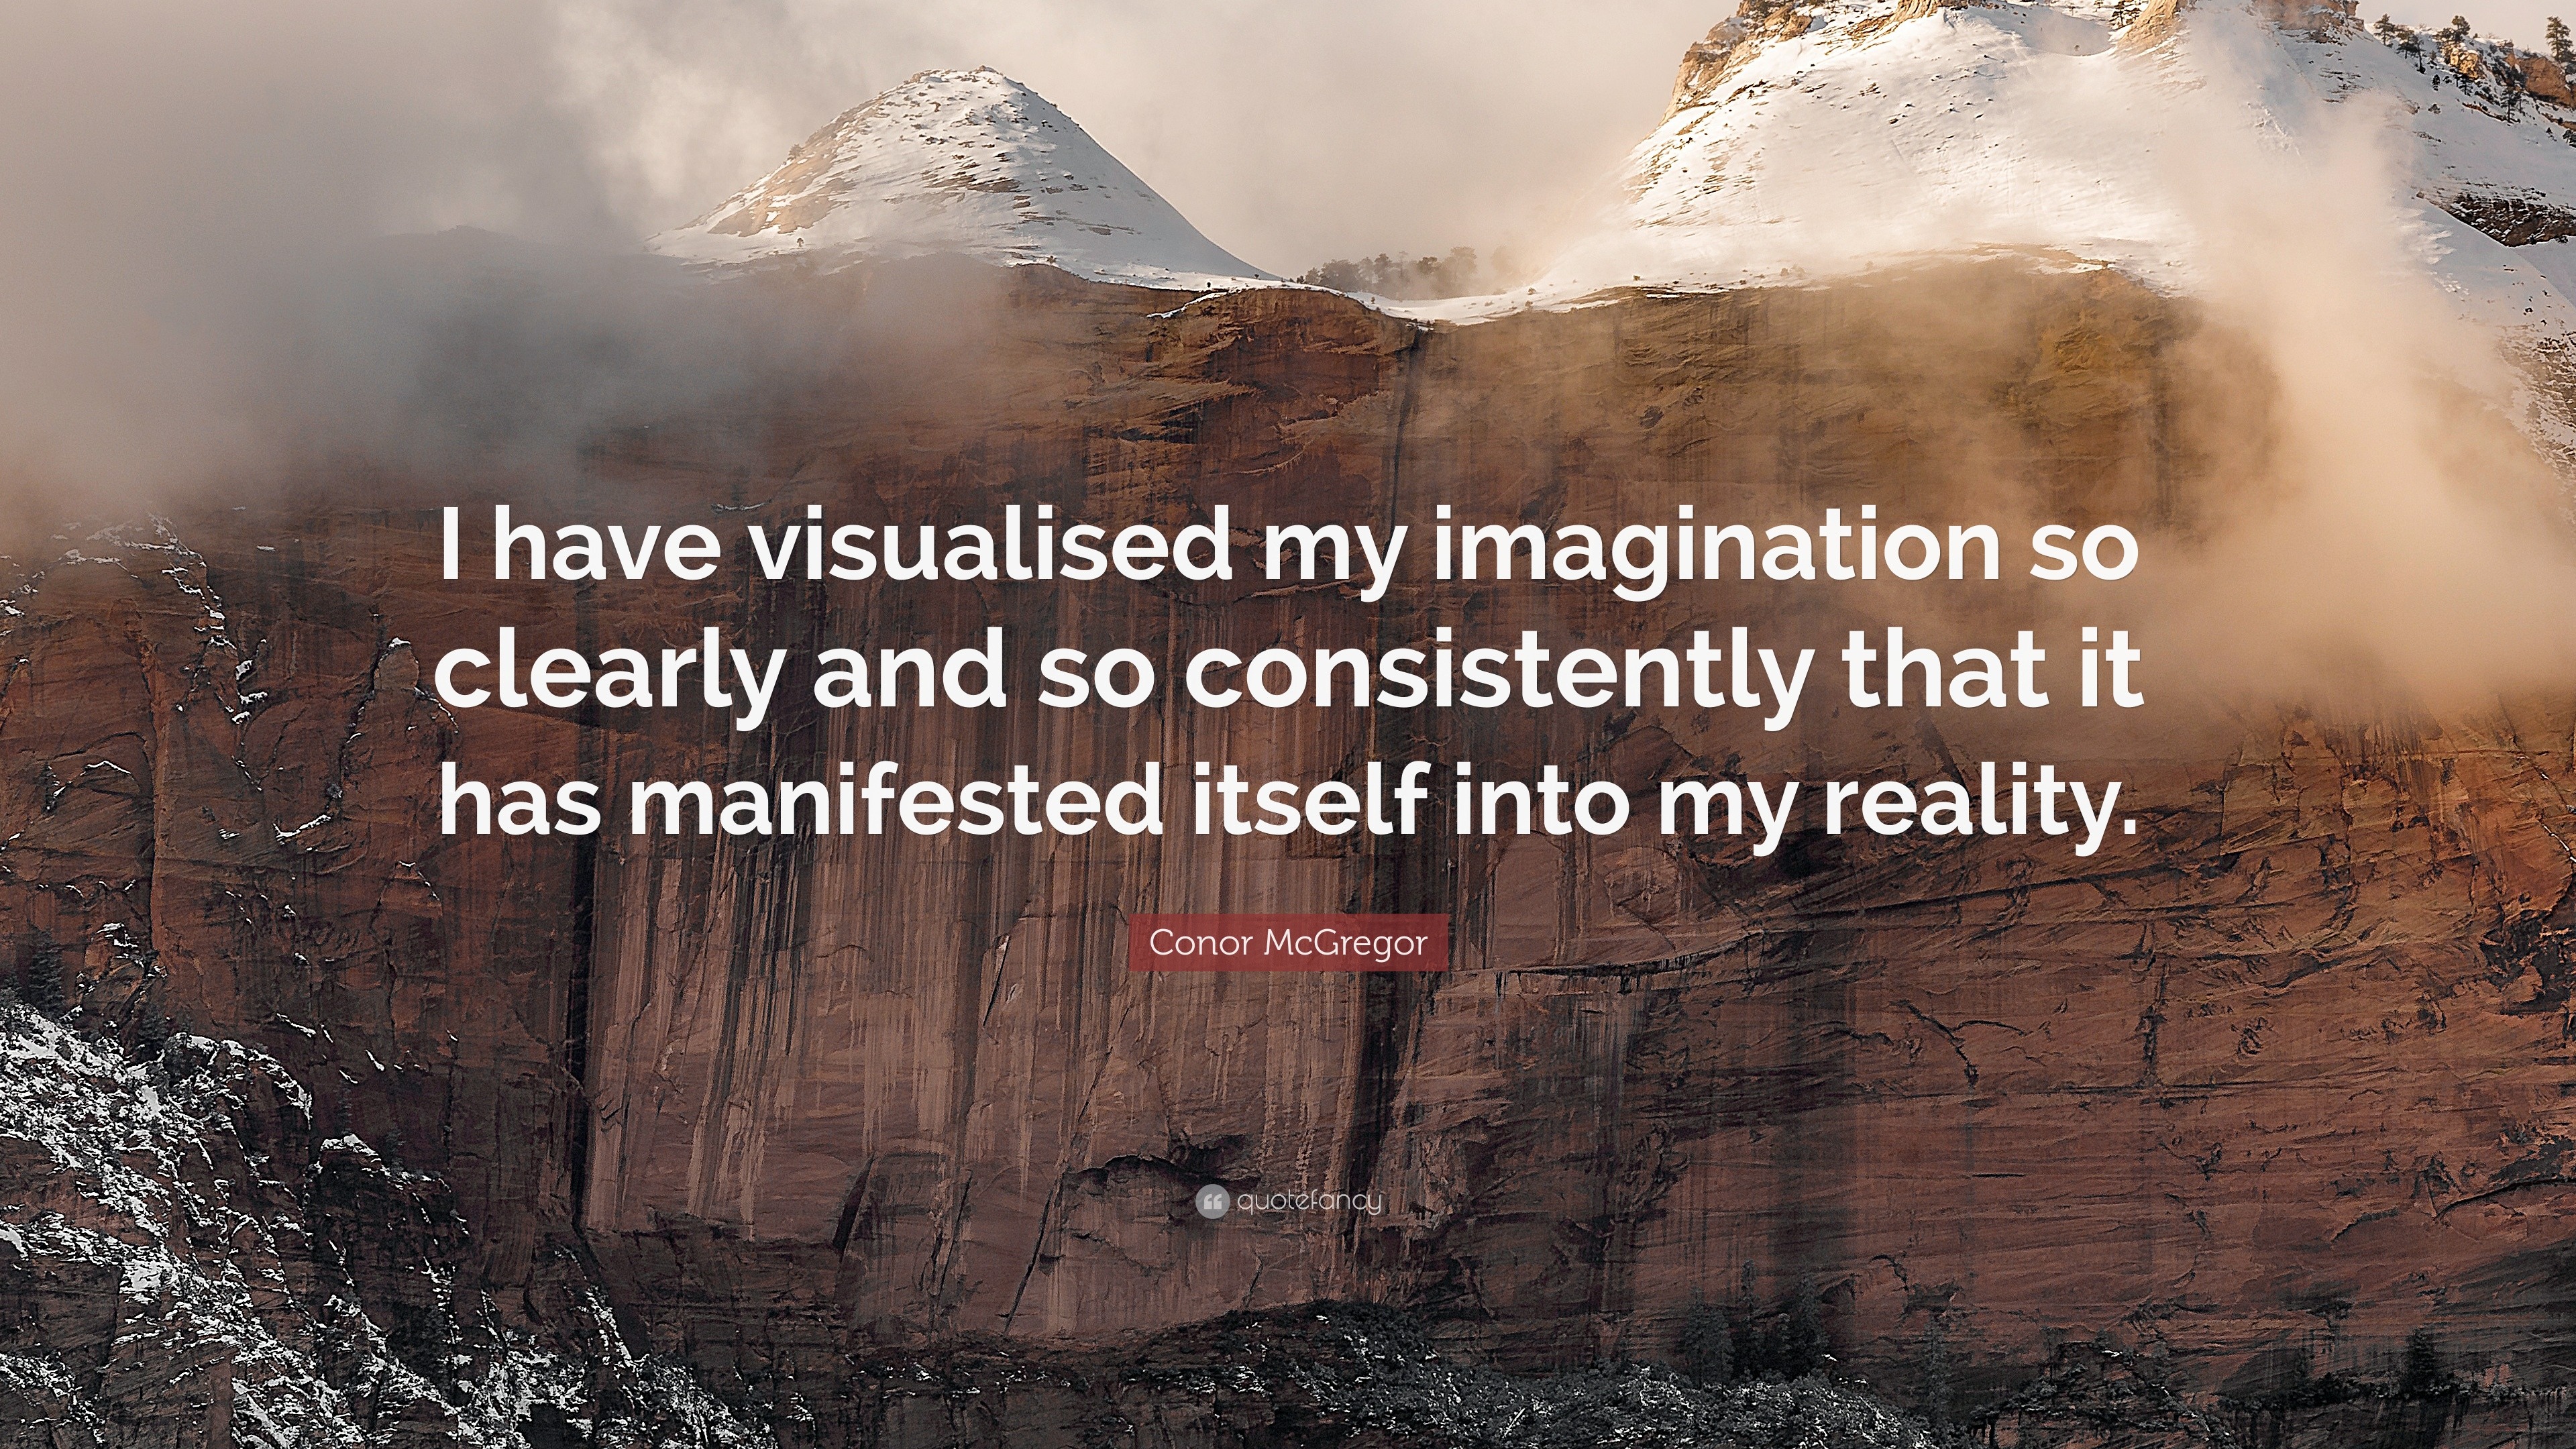 Super Conor McGregor Quote: “I have visualised my imagination so clearly AH-83